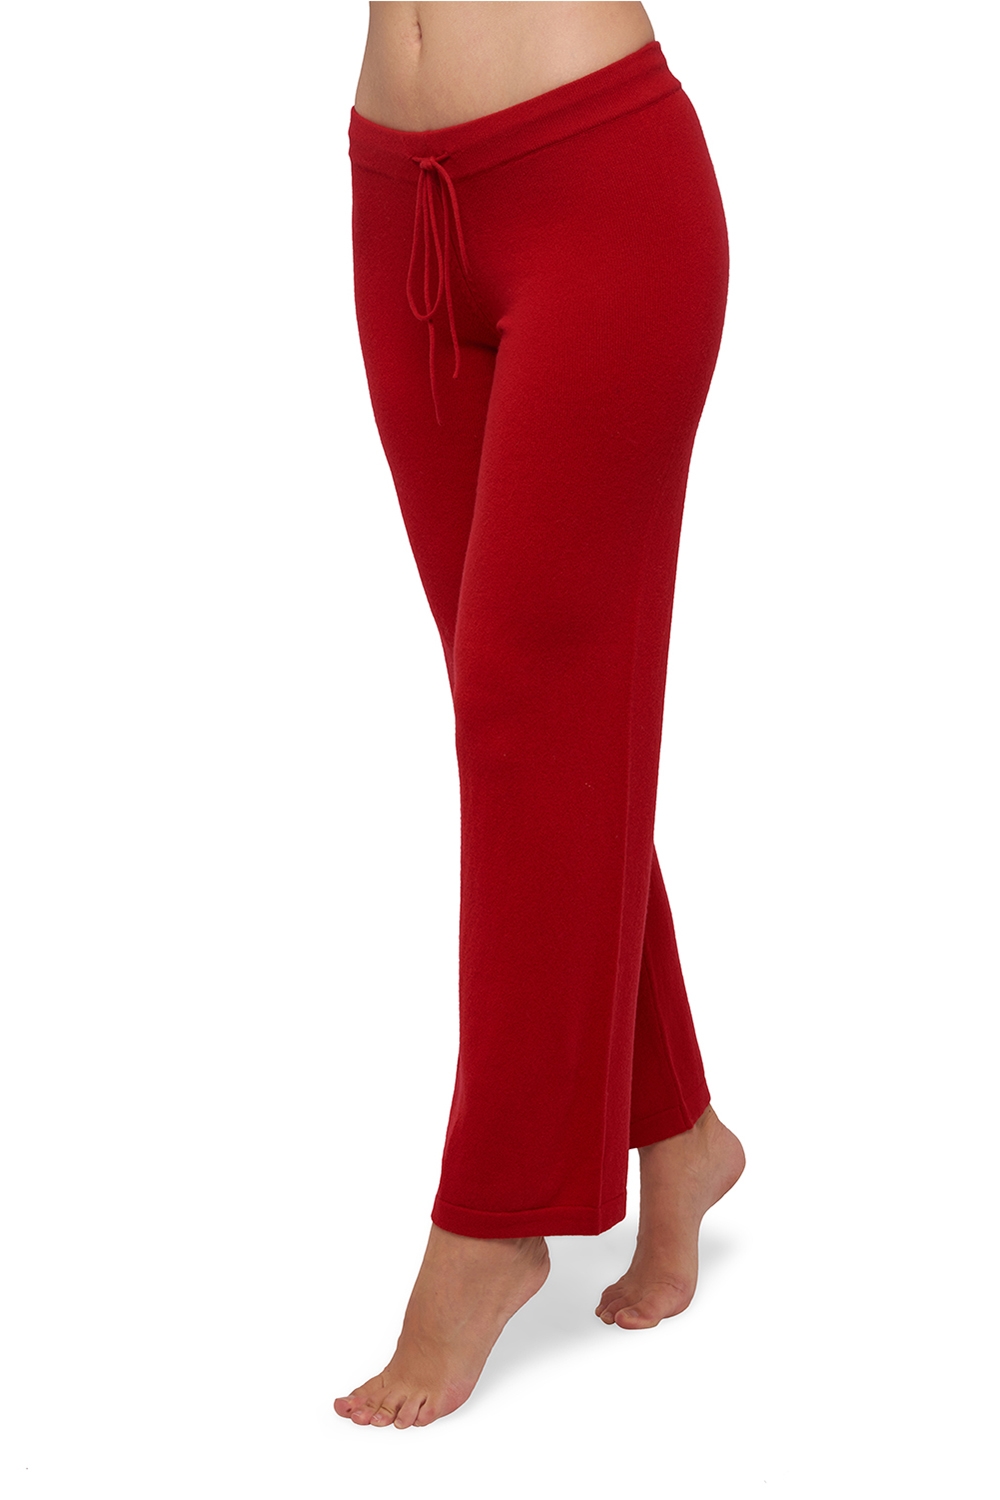 Cashmere ladies timeless classics malice blood red xs